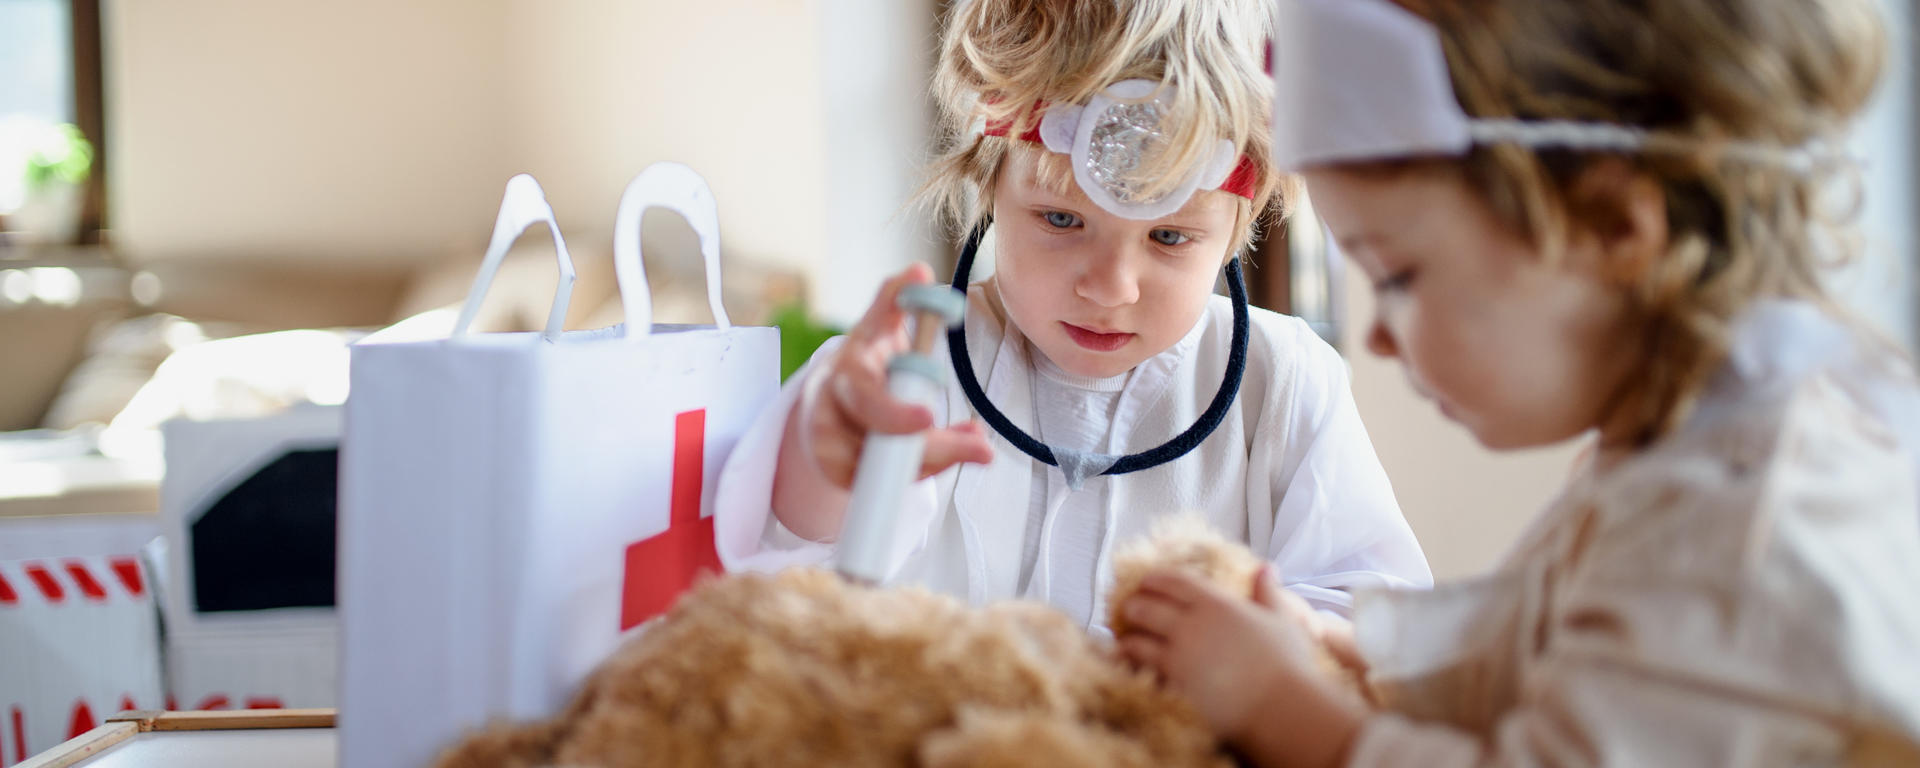 two kids playing doctor with teddy bear